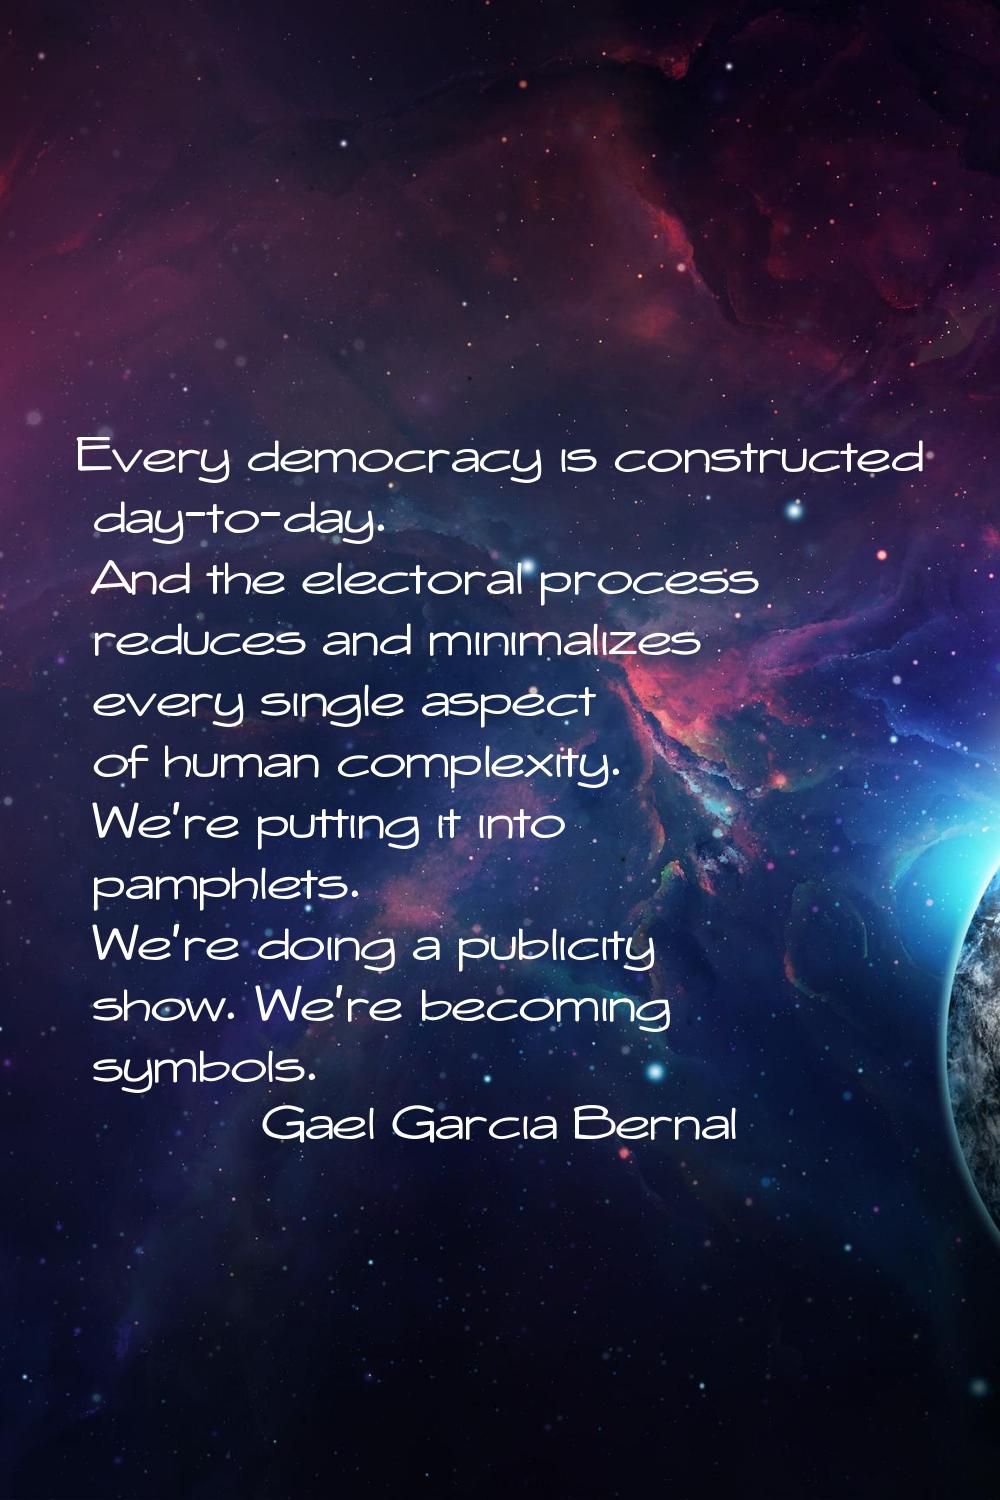 Every democracy is constructed day-to-day. And the electoral process reduces and minimalizes every 